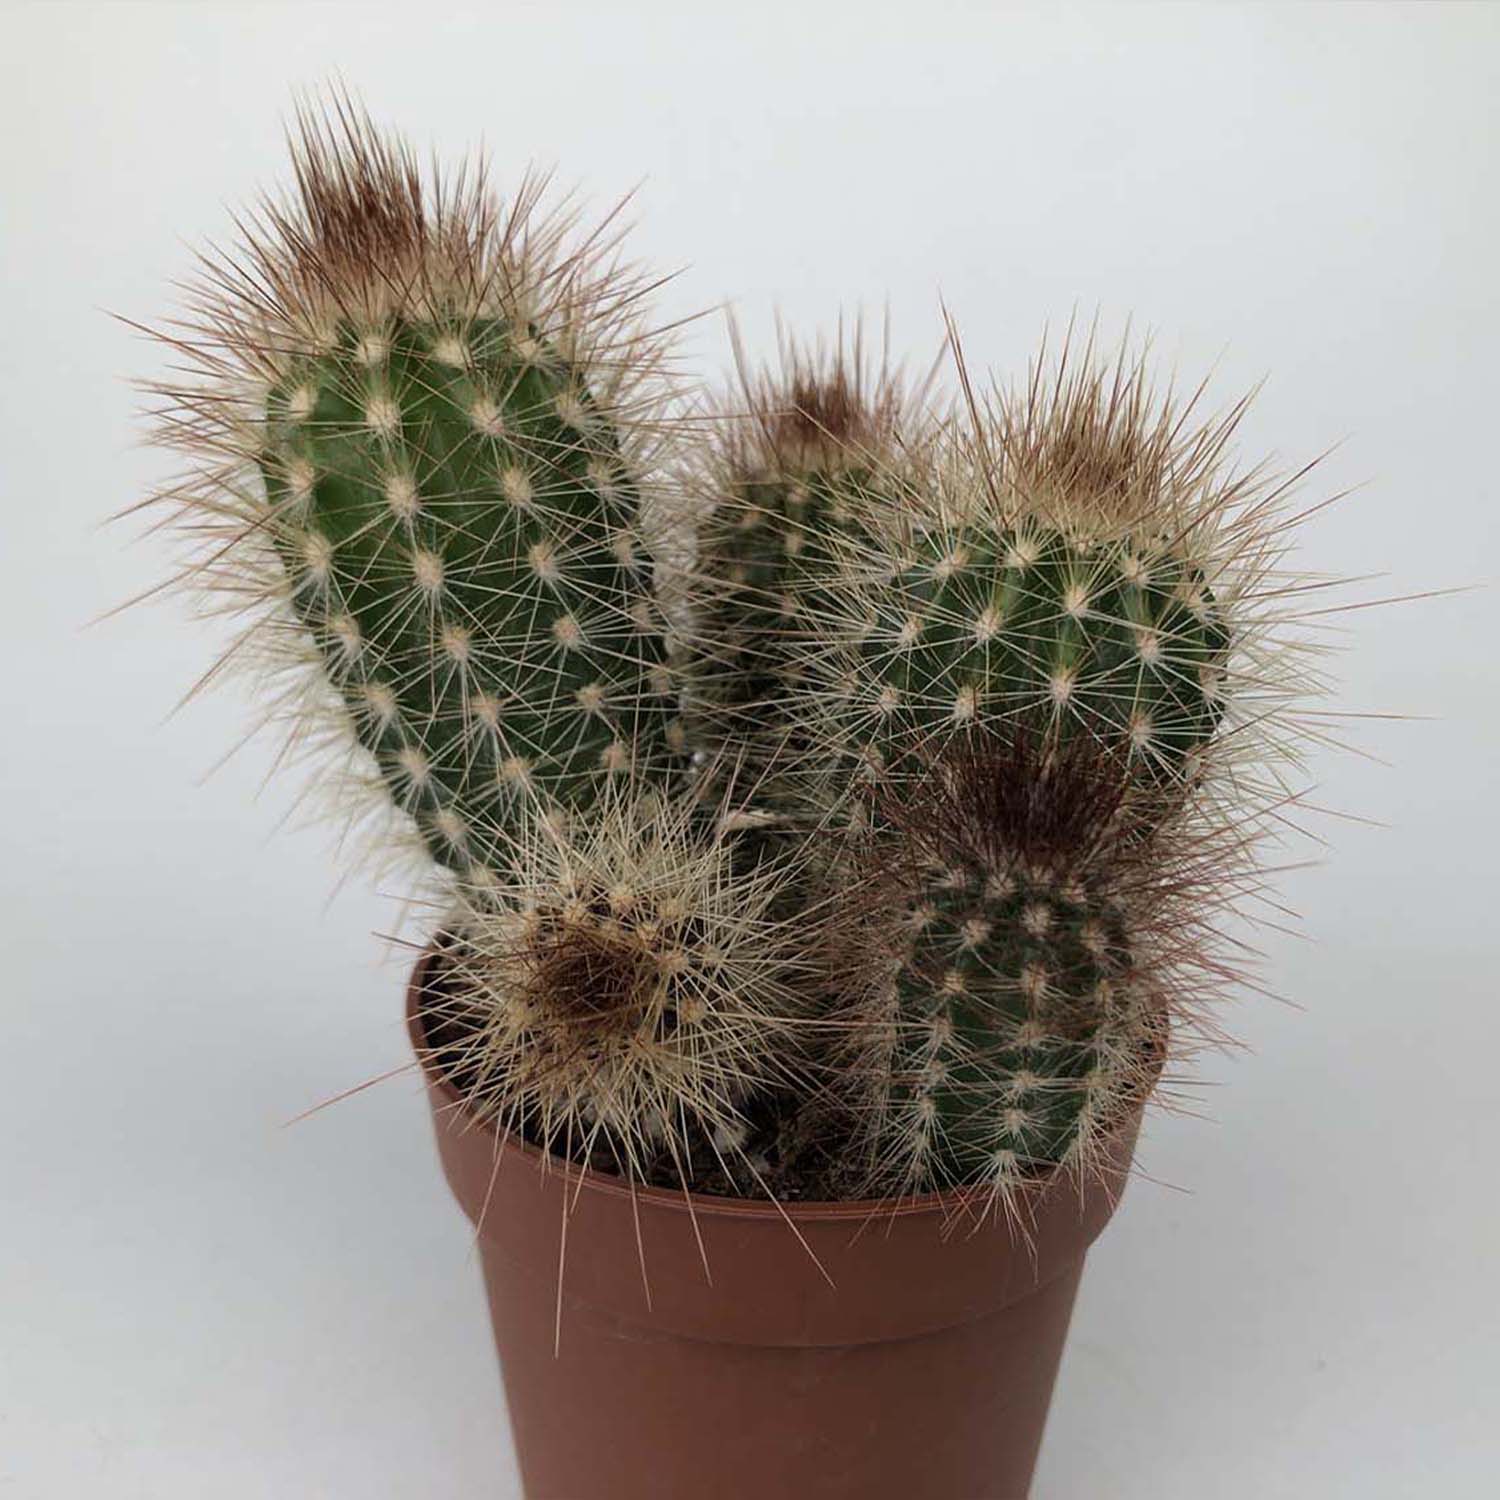 You are currently viewing Pilosocereus braunii